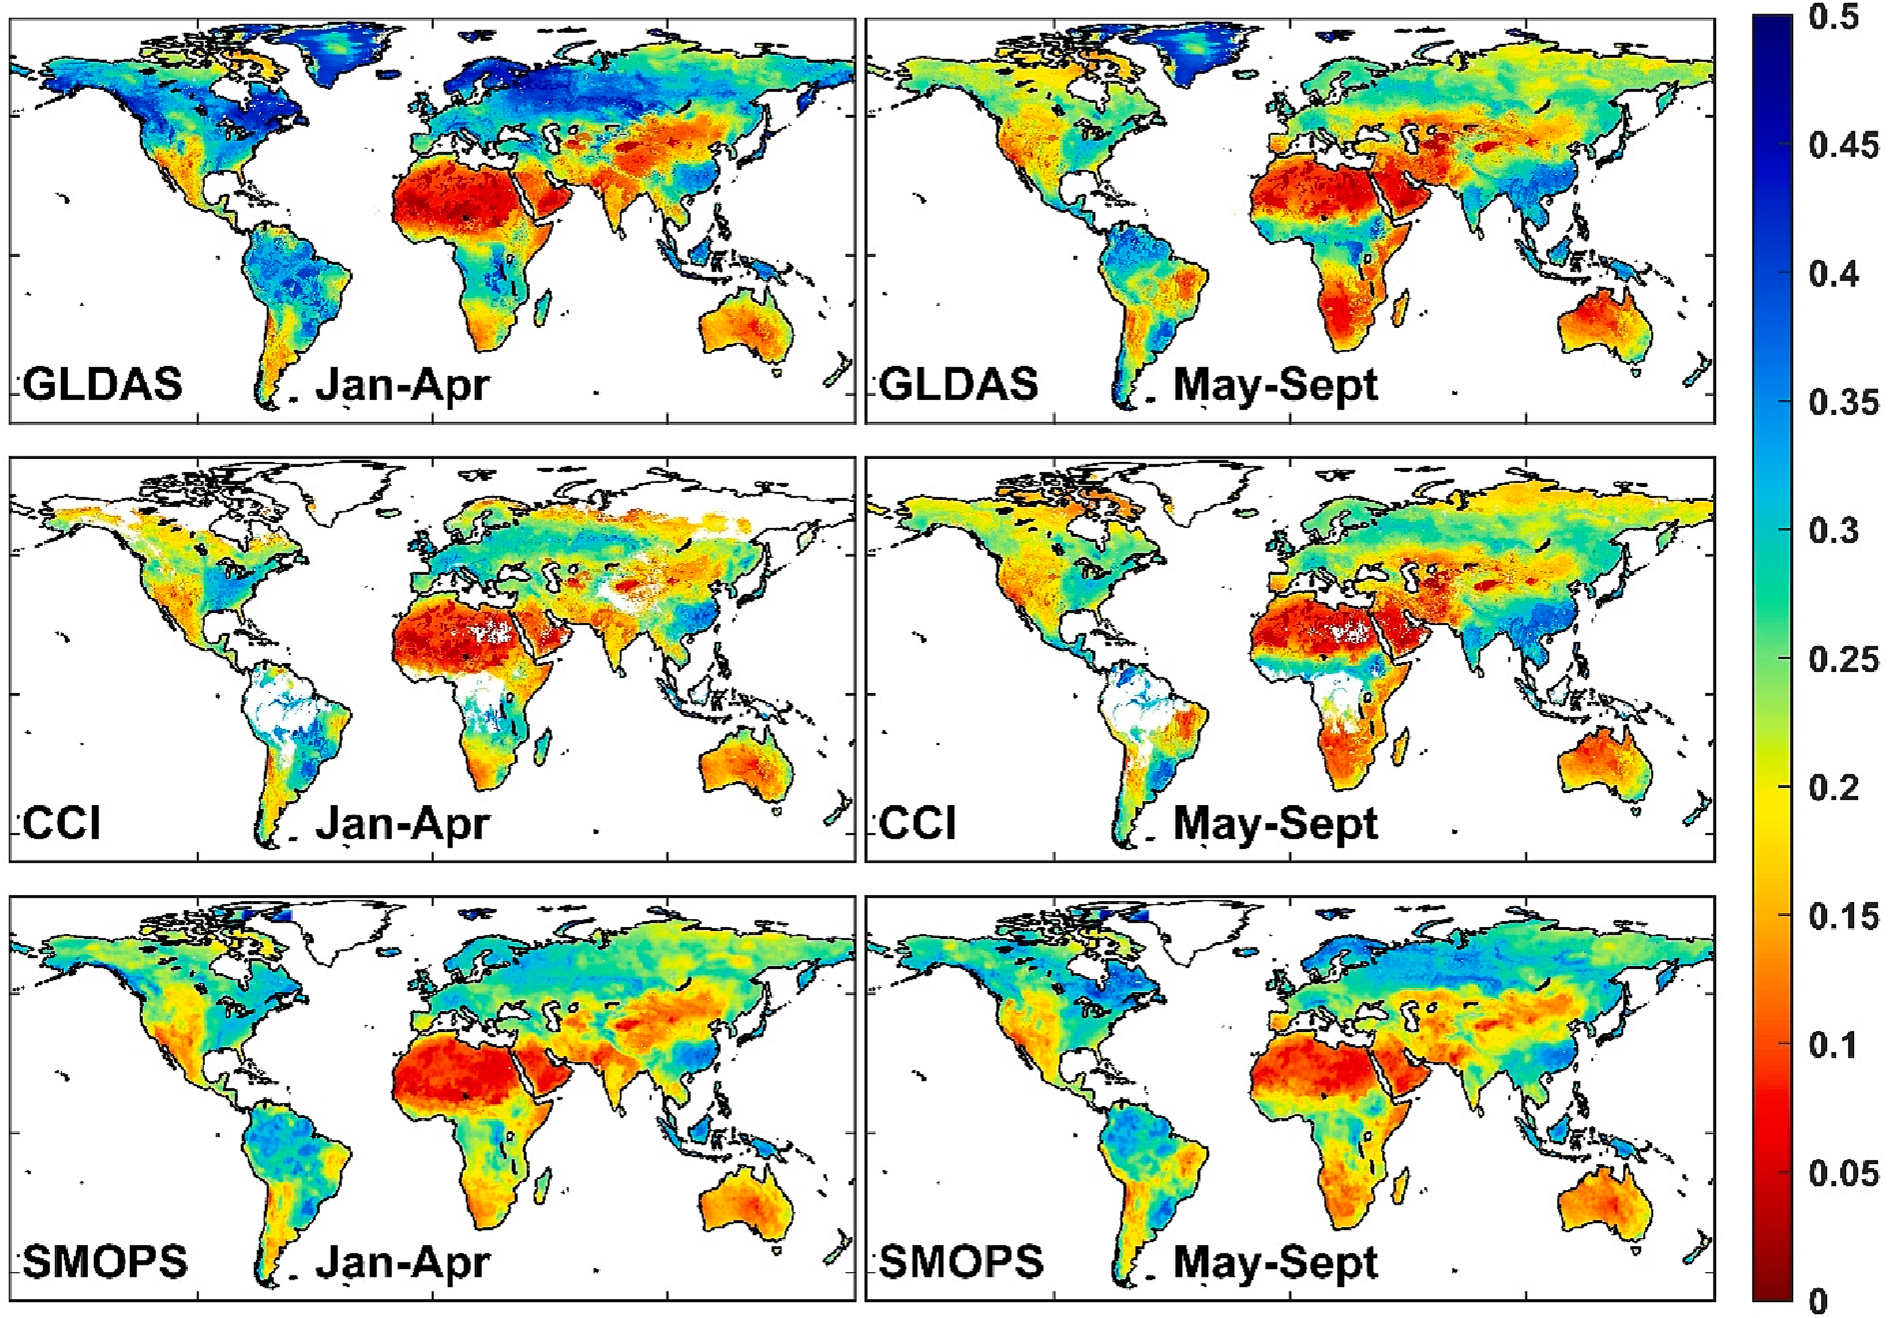 Caption: Season-averaged soil moisture (m3/m3) for GLDAS, CCI and SMOPS over the 2015- 2018 period with left and right columns for cold (January-April) and warm season (May- September), respectively.